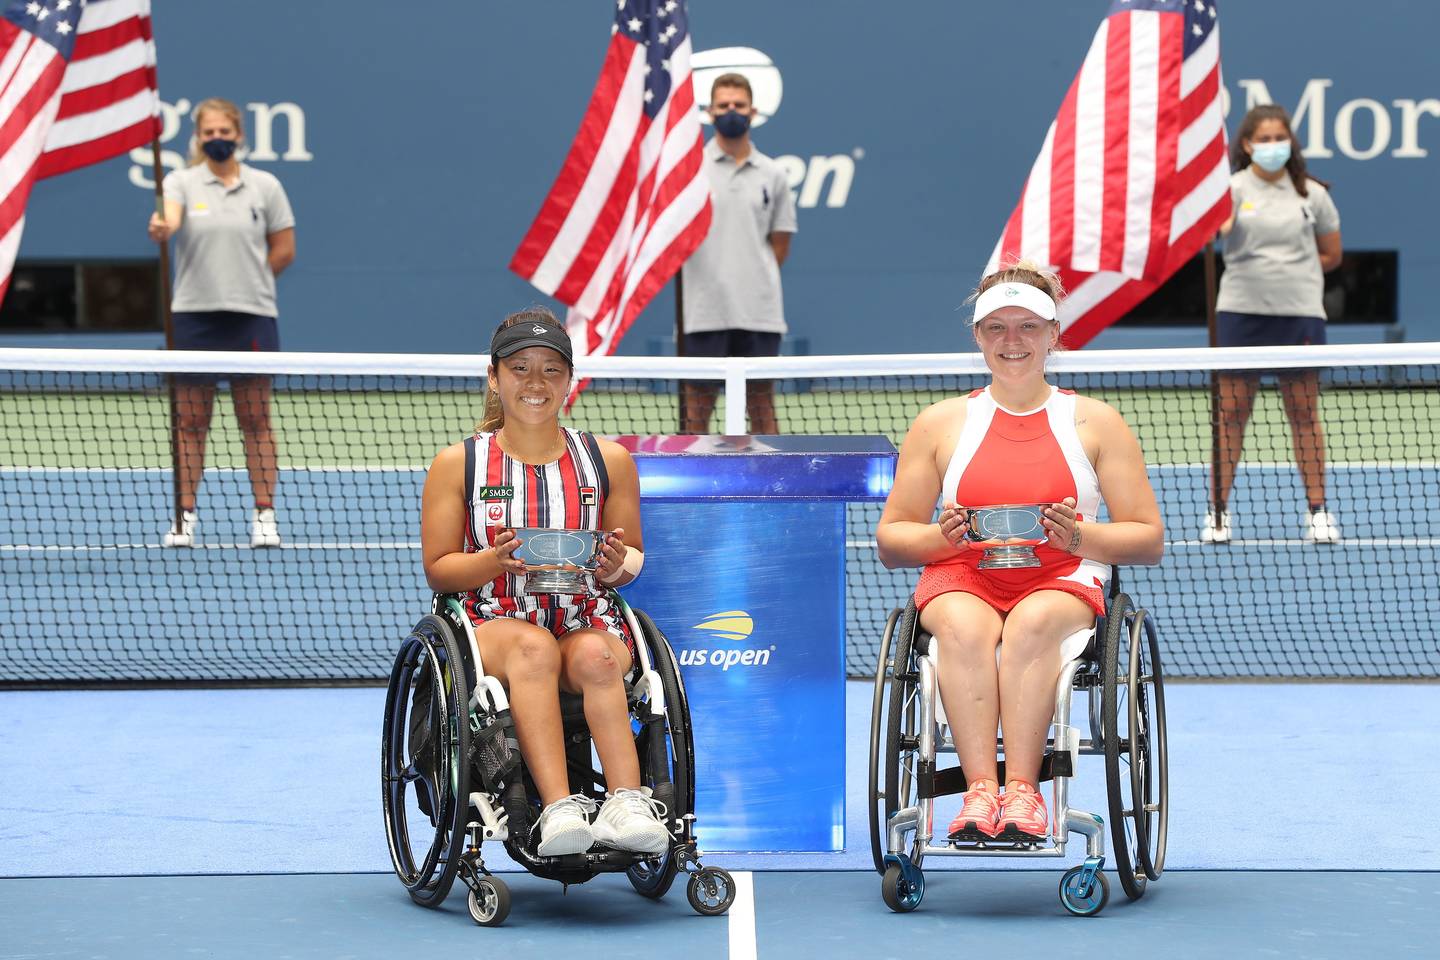 Jordanne Whiley and Yui Kamiji holding Women's Doubles Champions trophies.